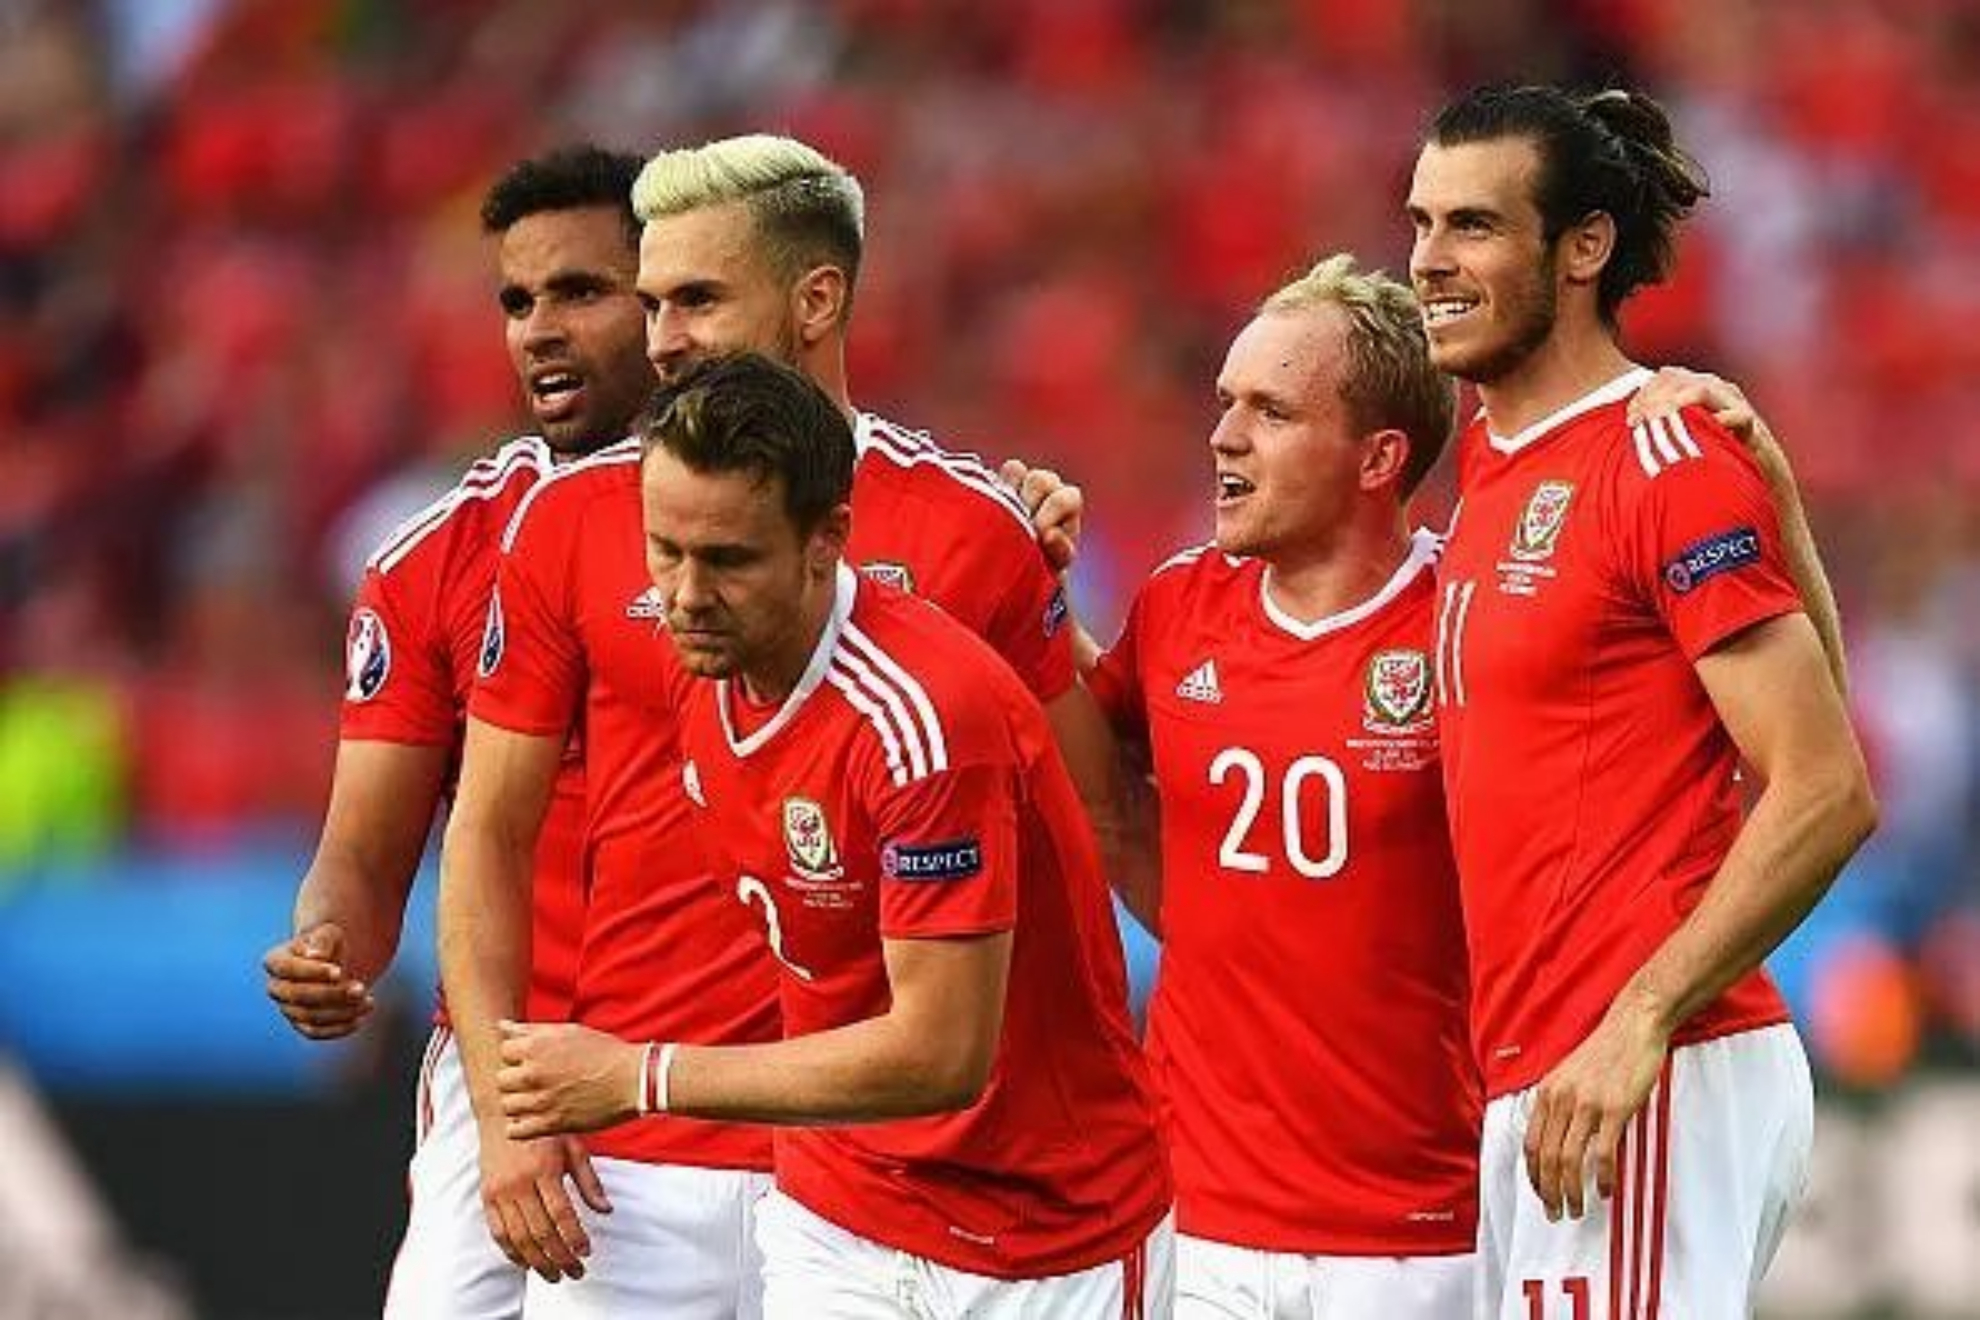 Chris Gunter and Jonathan Williams are in the Wales National Team for the World Cup alongside Gareth Bale.